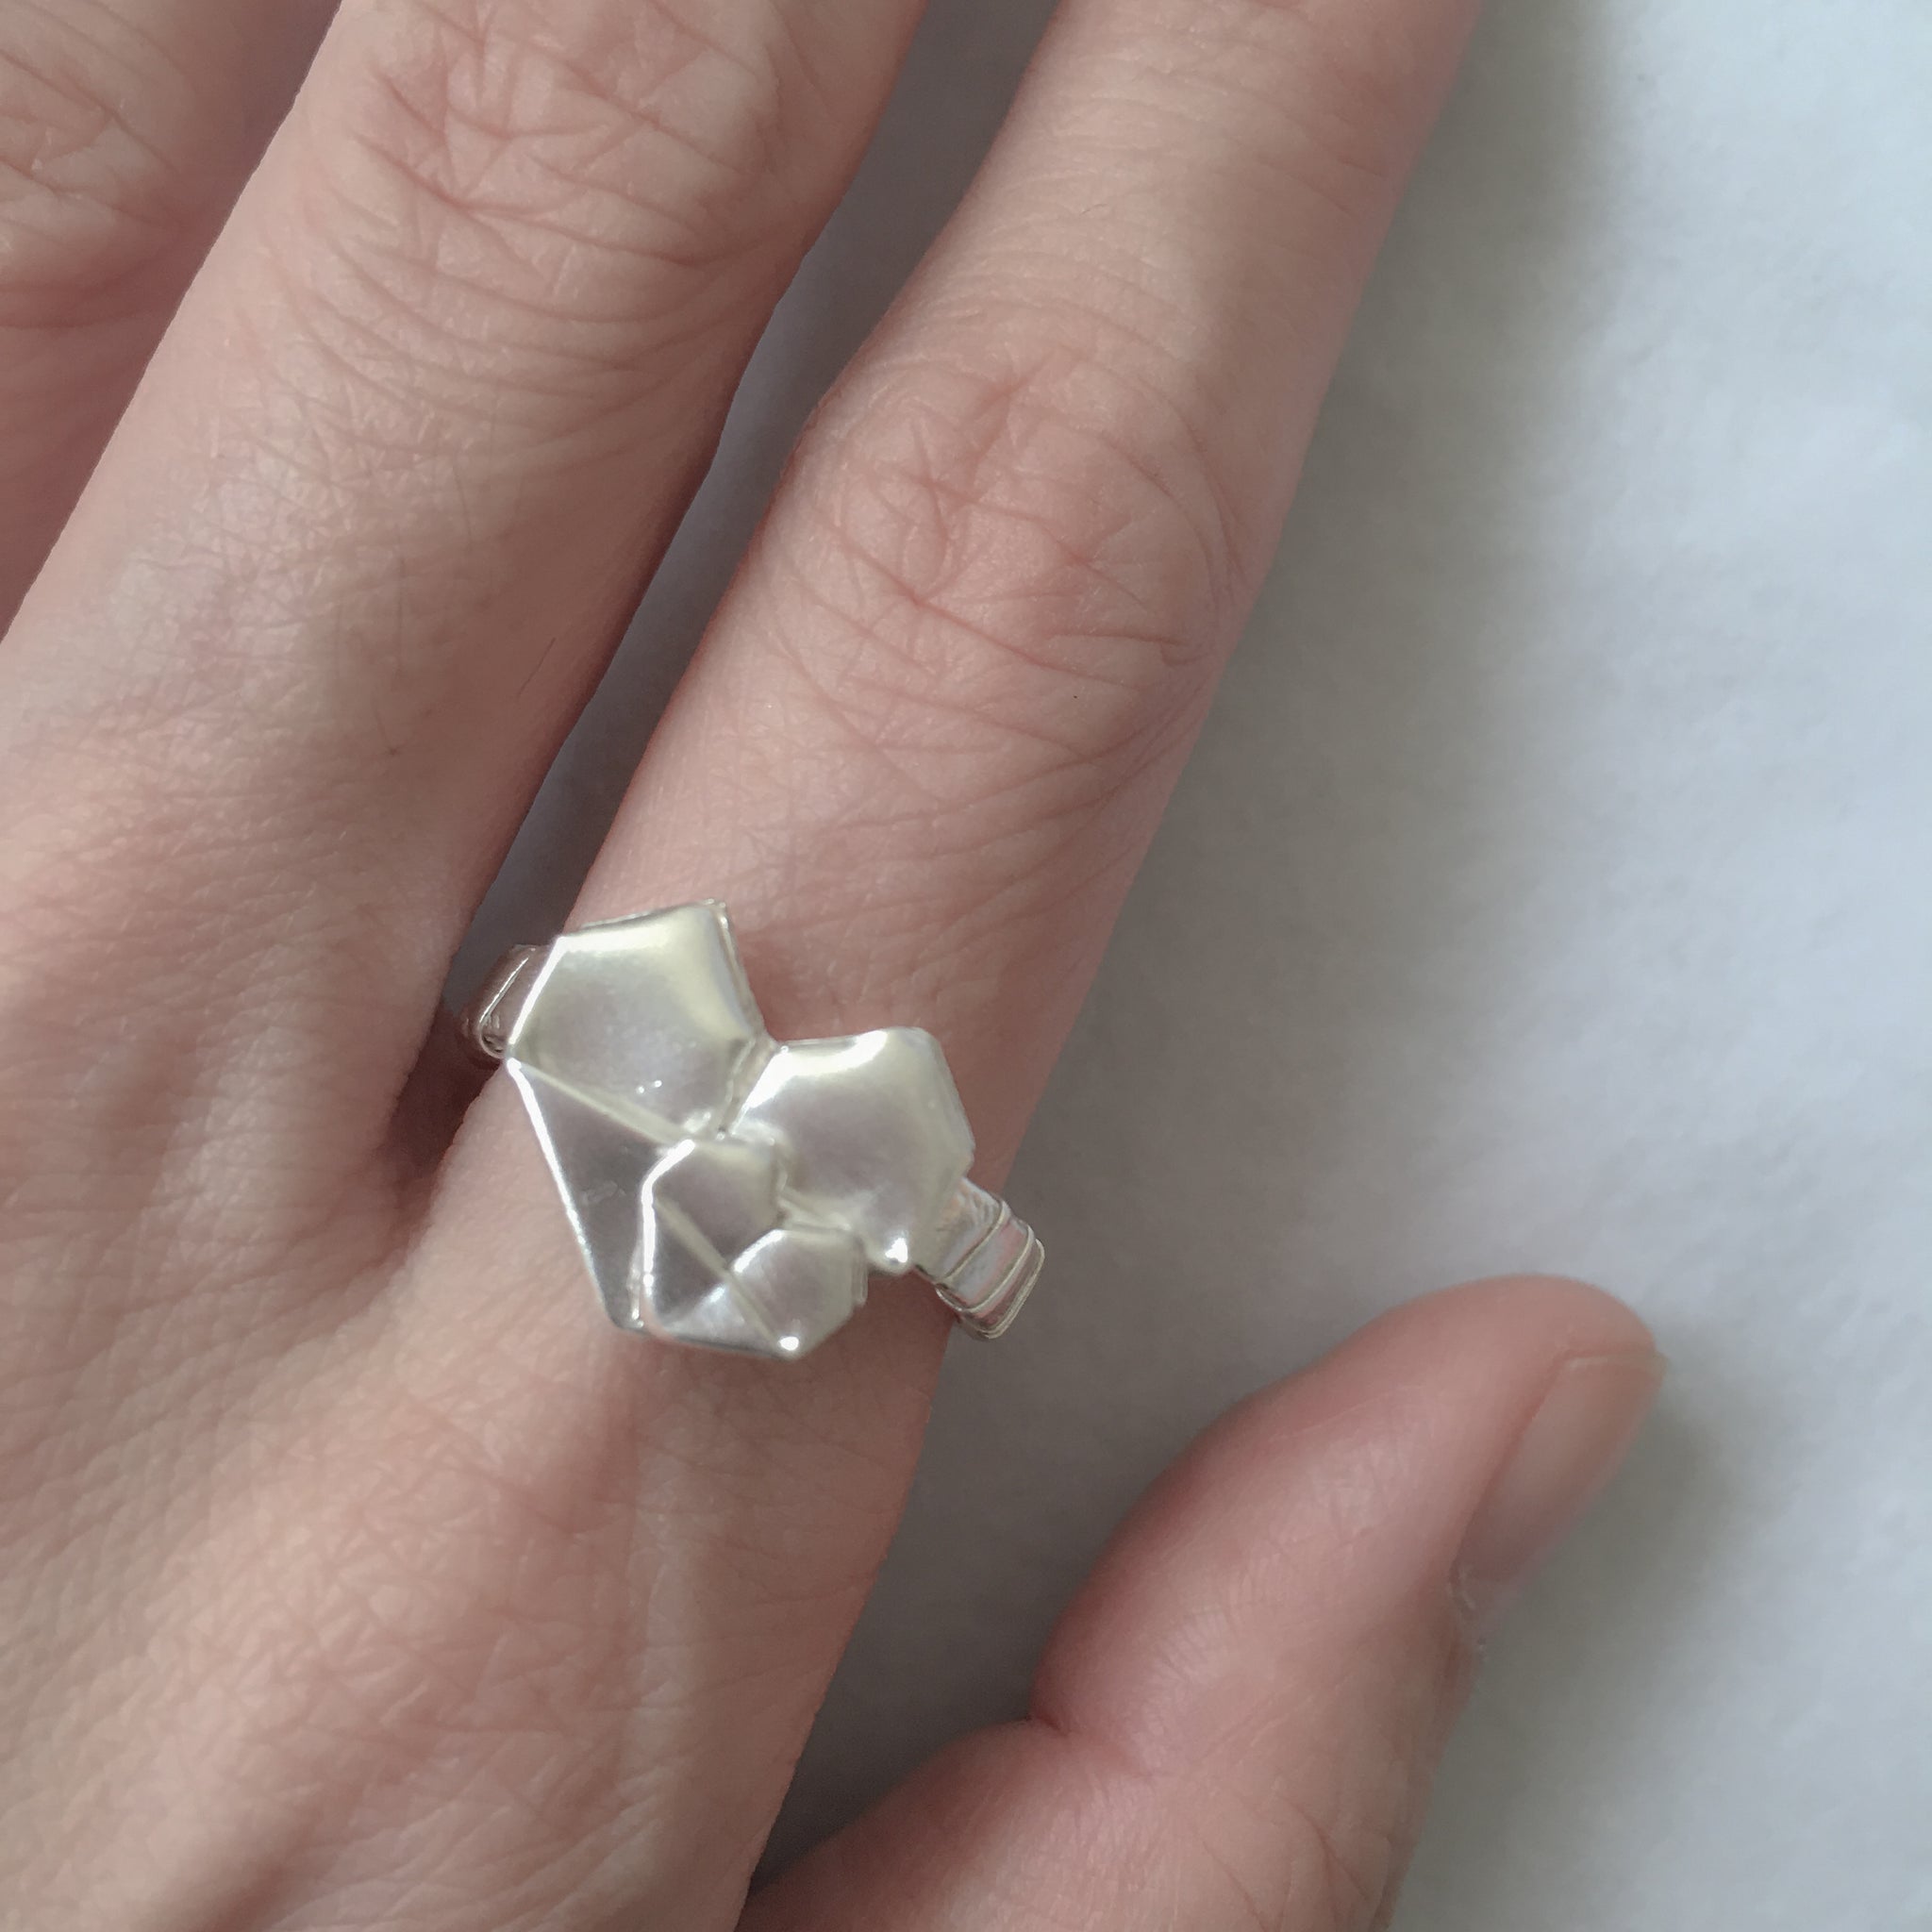 Ring D 925 Silver Origami Big and Small Heart Ring Size 14